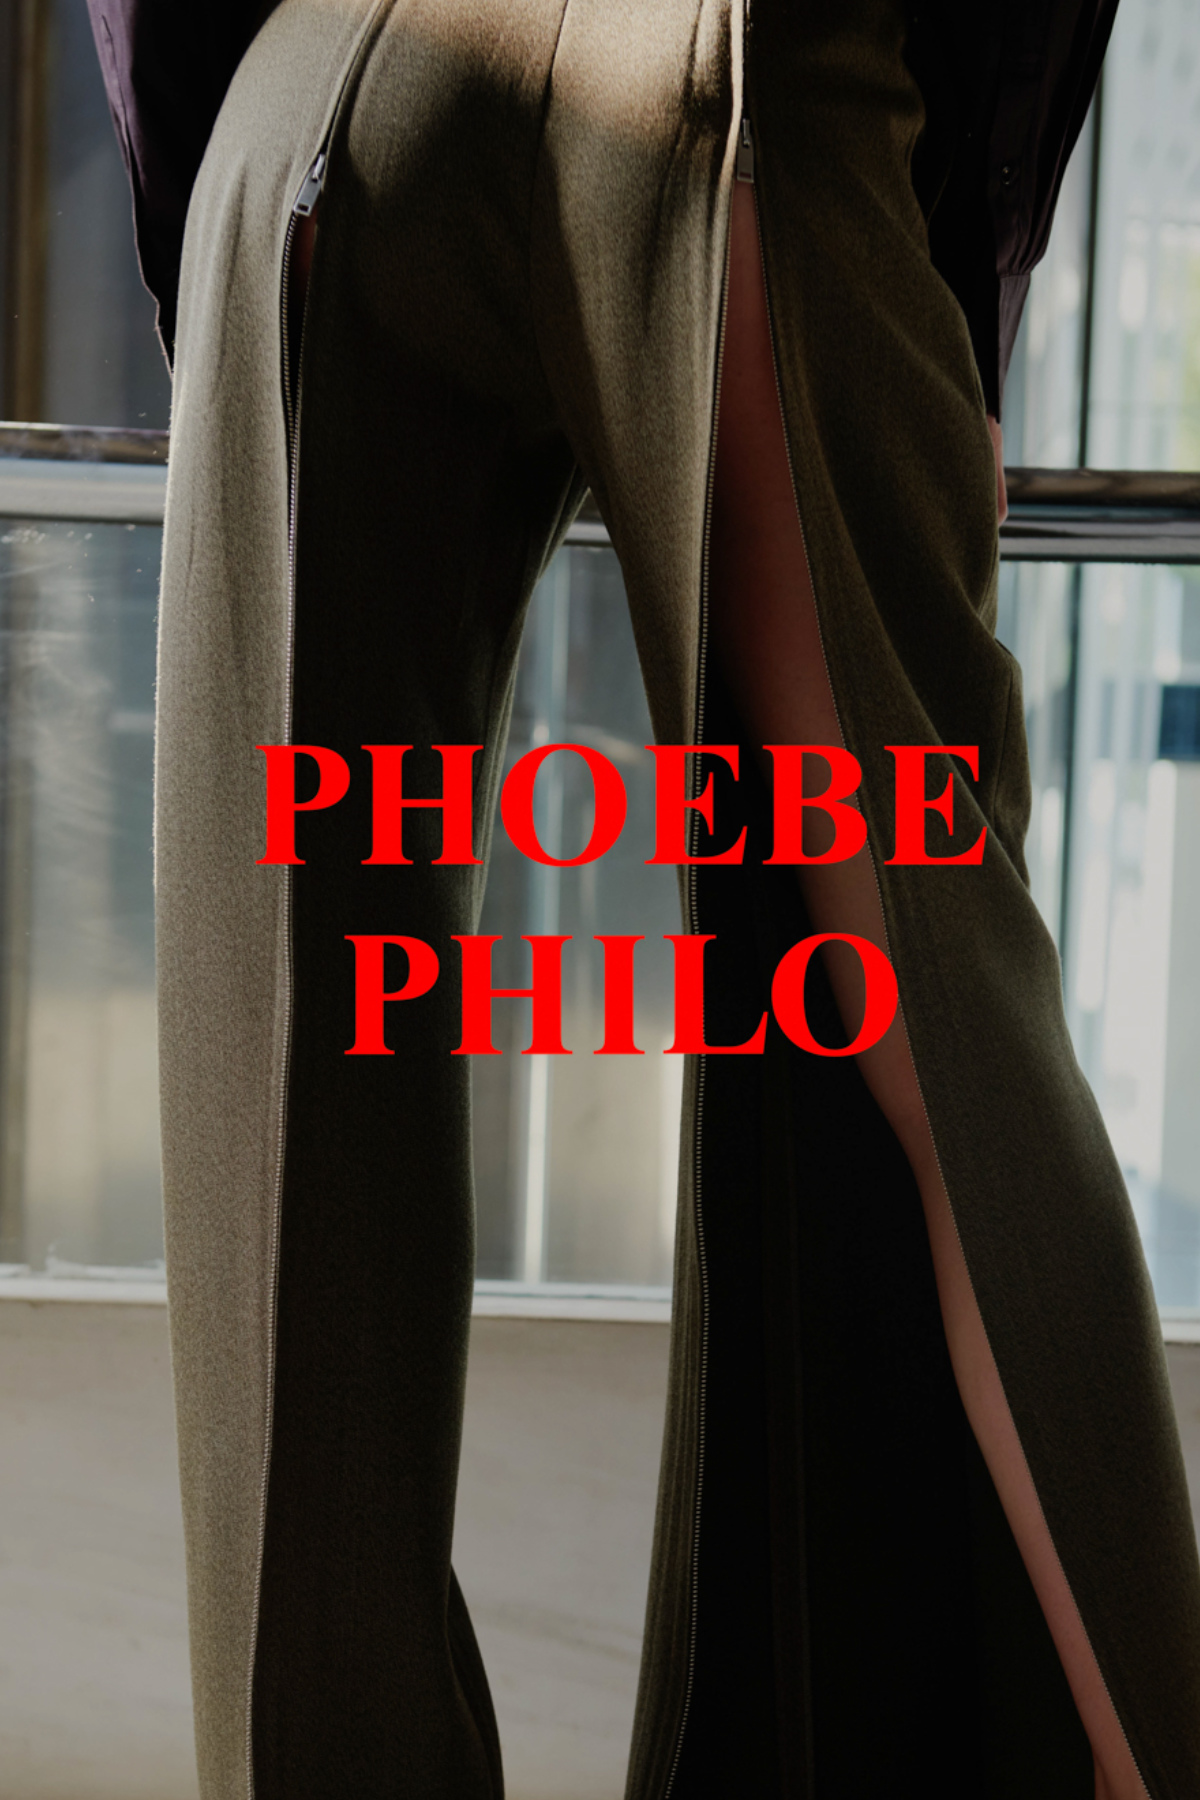 Phoebe Philo's launch: The highs and lows of exclusivity